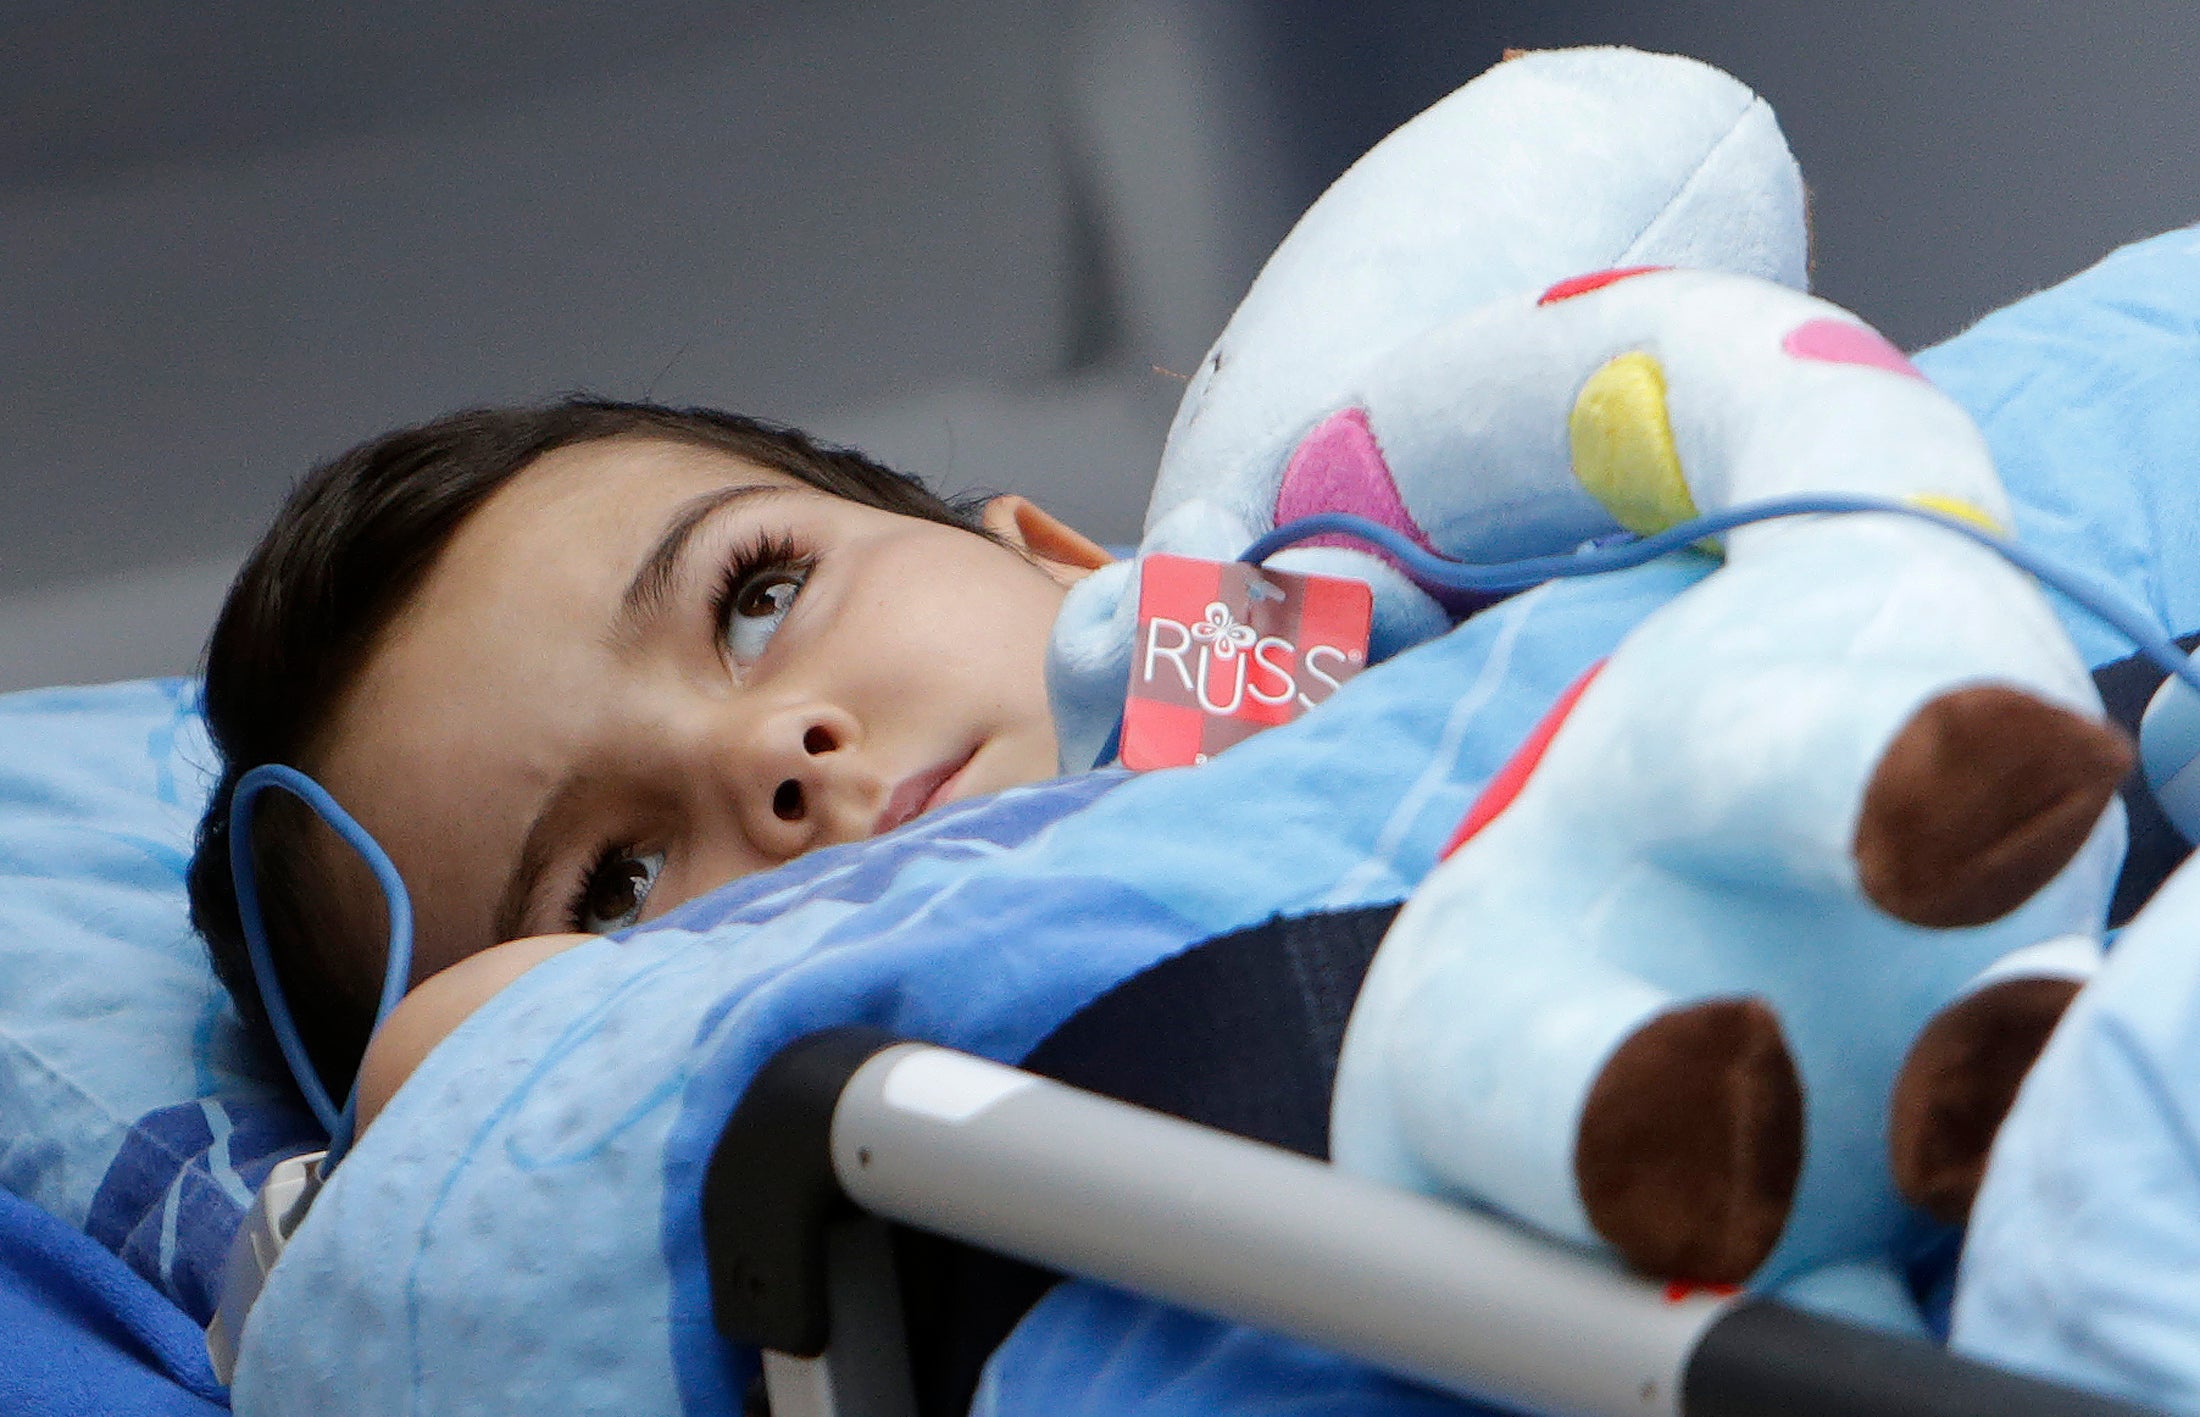 The NHS has agreed to fund Ashya King's treatment in the Czech Republic